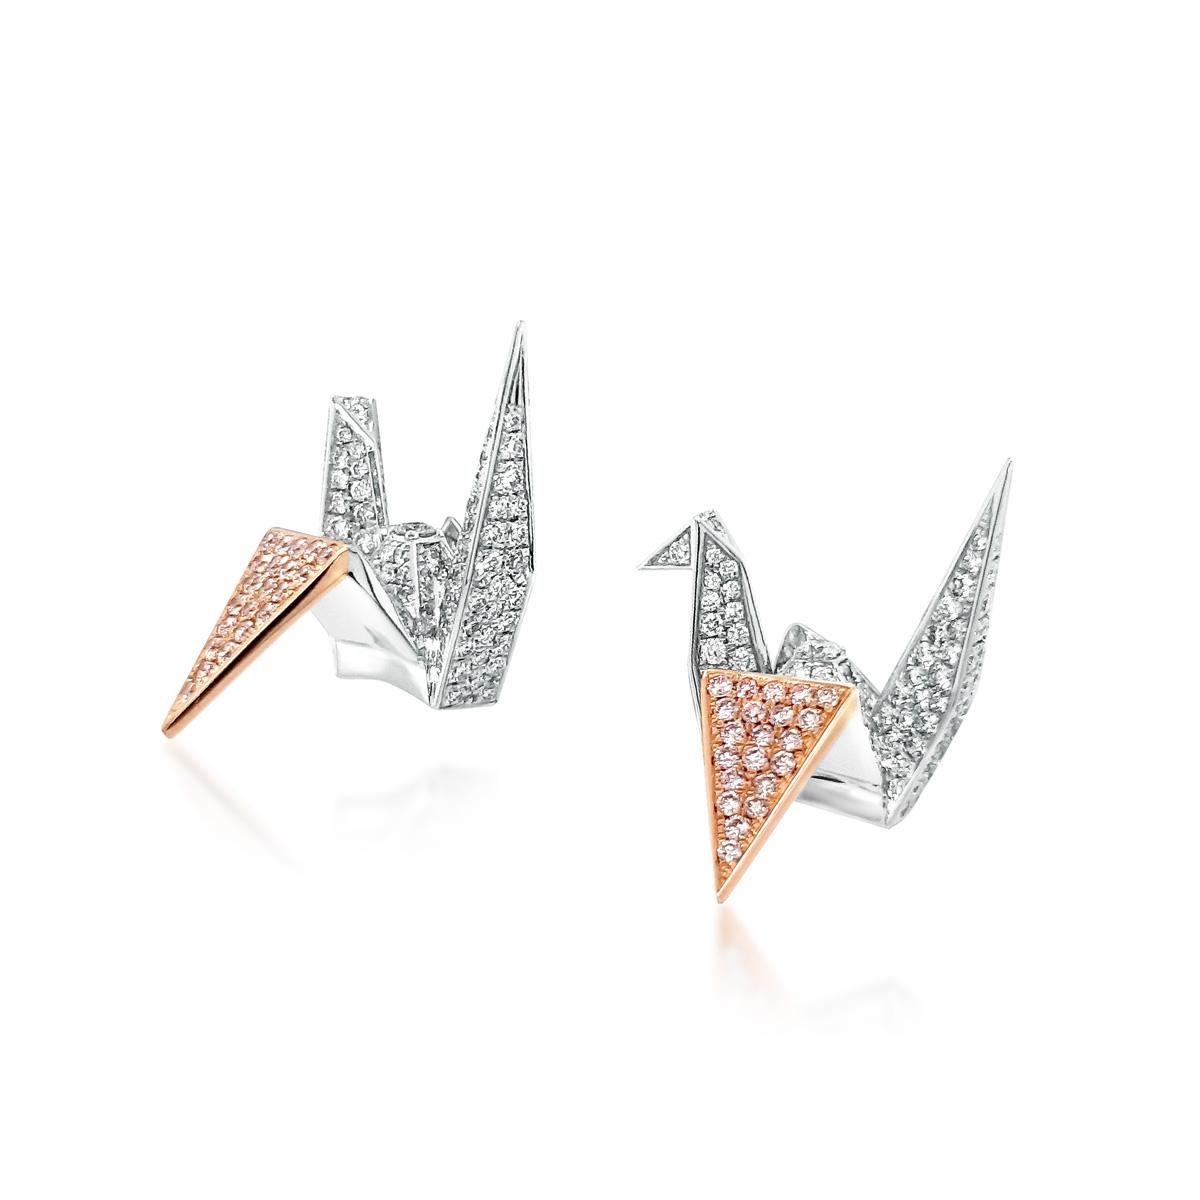 Collection: In Whimsy we Play

Title:  “Ninja Crane” Pink Diamond Edition Earrings

These limited edition earrings are for the art loving lady with large doses of daring. After all, who else would don earrings with angular sharp lines that could